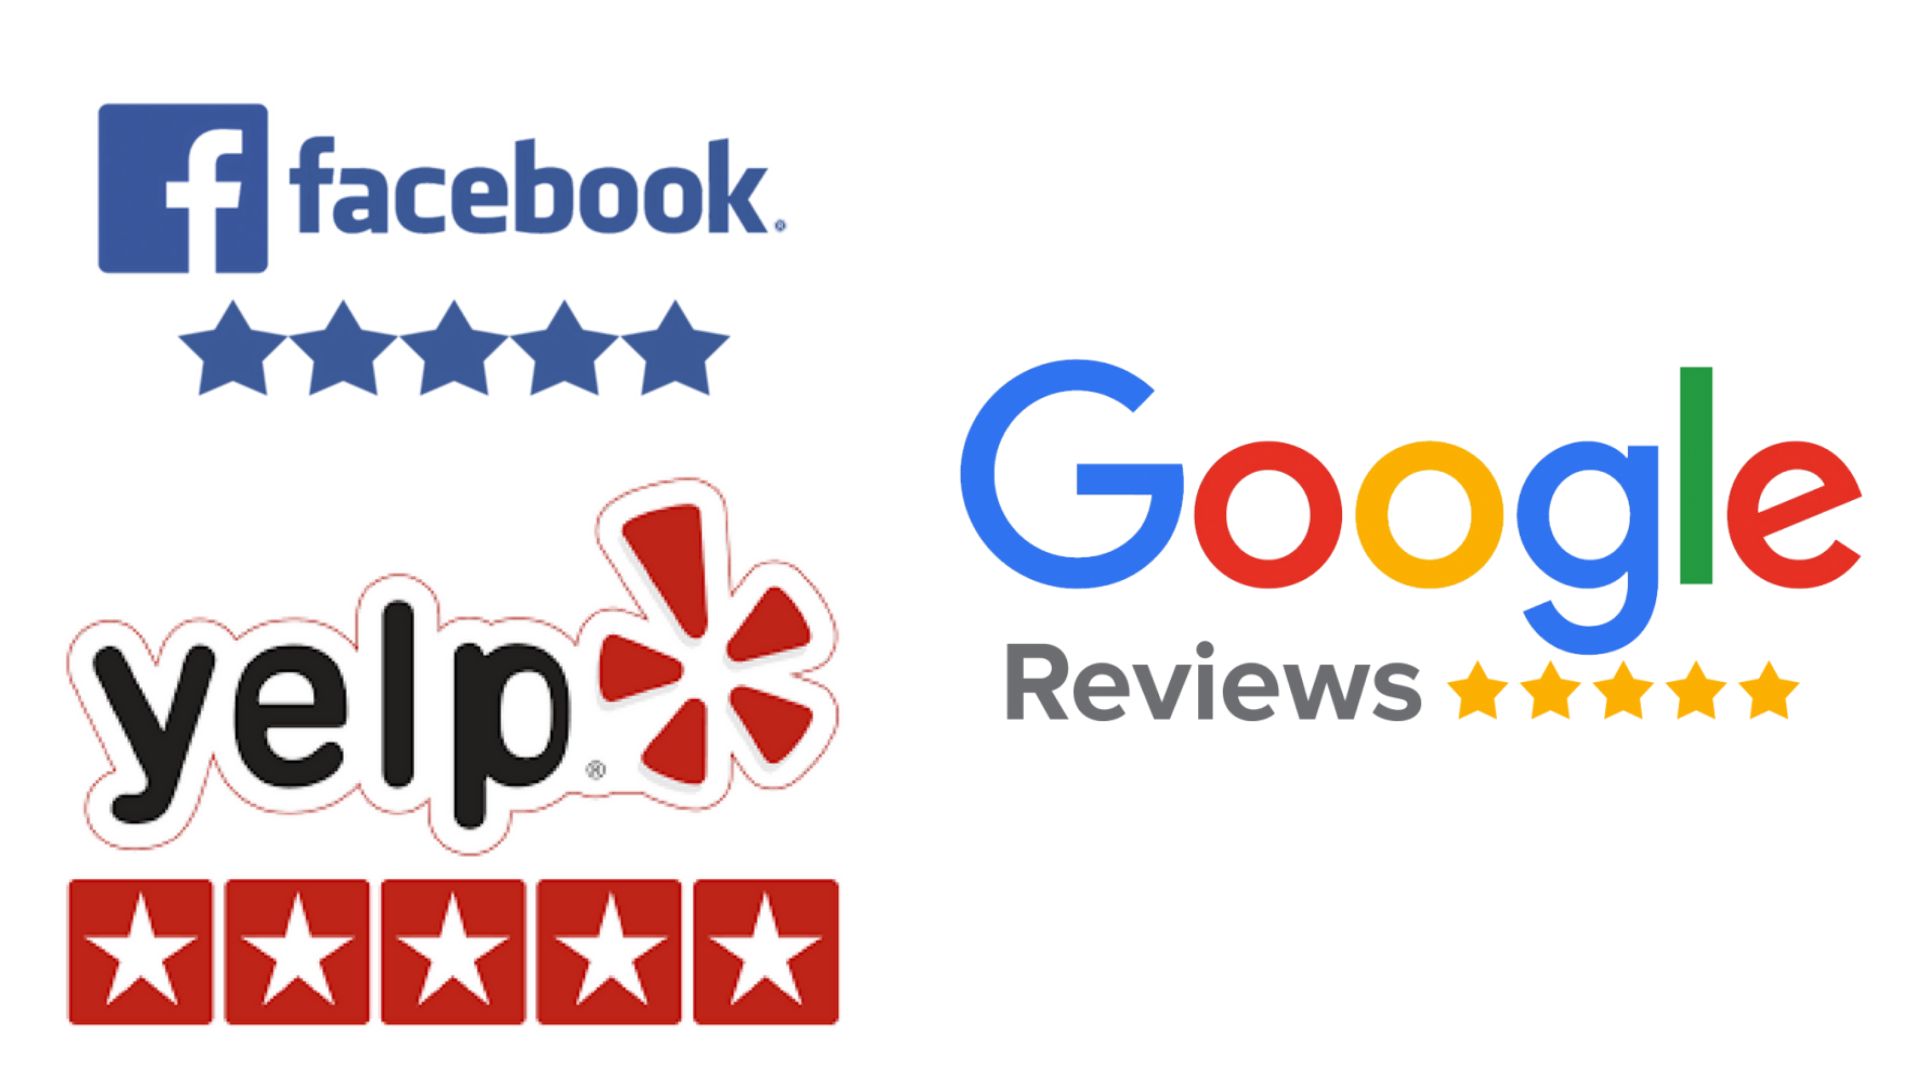 Get More Good Reviews For Your Business